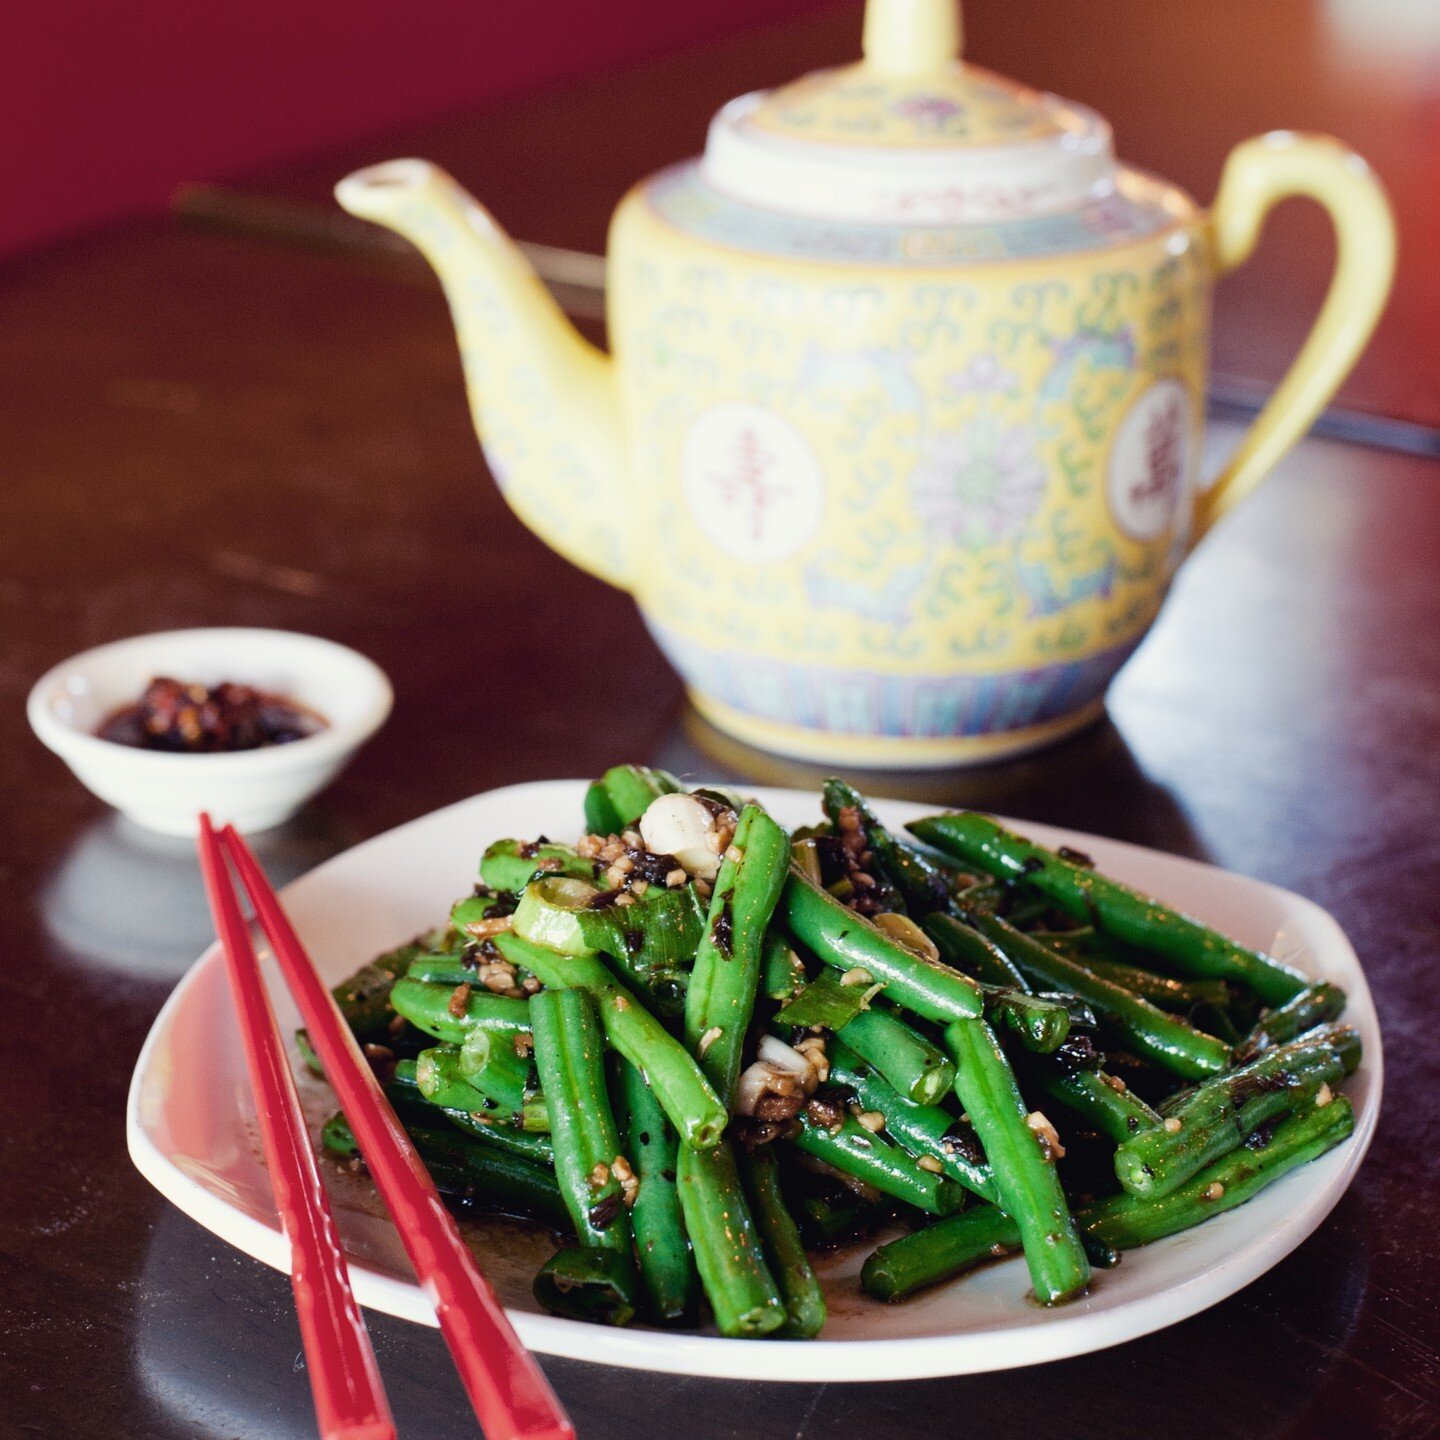 Classic Sichuan Dish - Sichuan quick-fried green beans with minced pork, ya cai mustard greens

#sichuancuisine #chinesefood #tasty #classicfood #chilli #authentic #sichuanfood in #kenmore